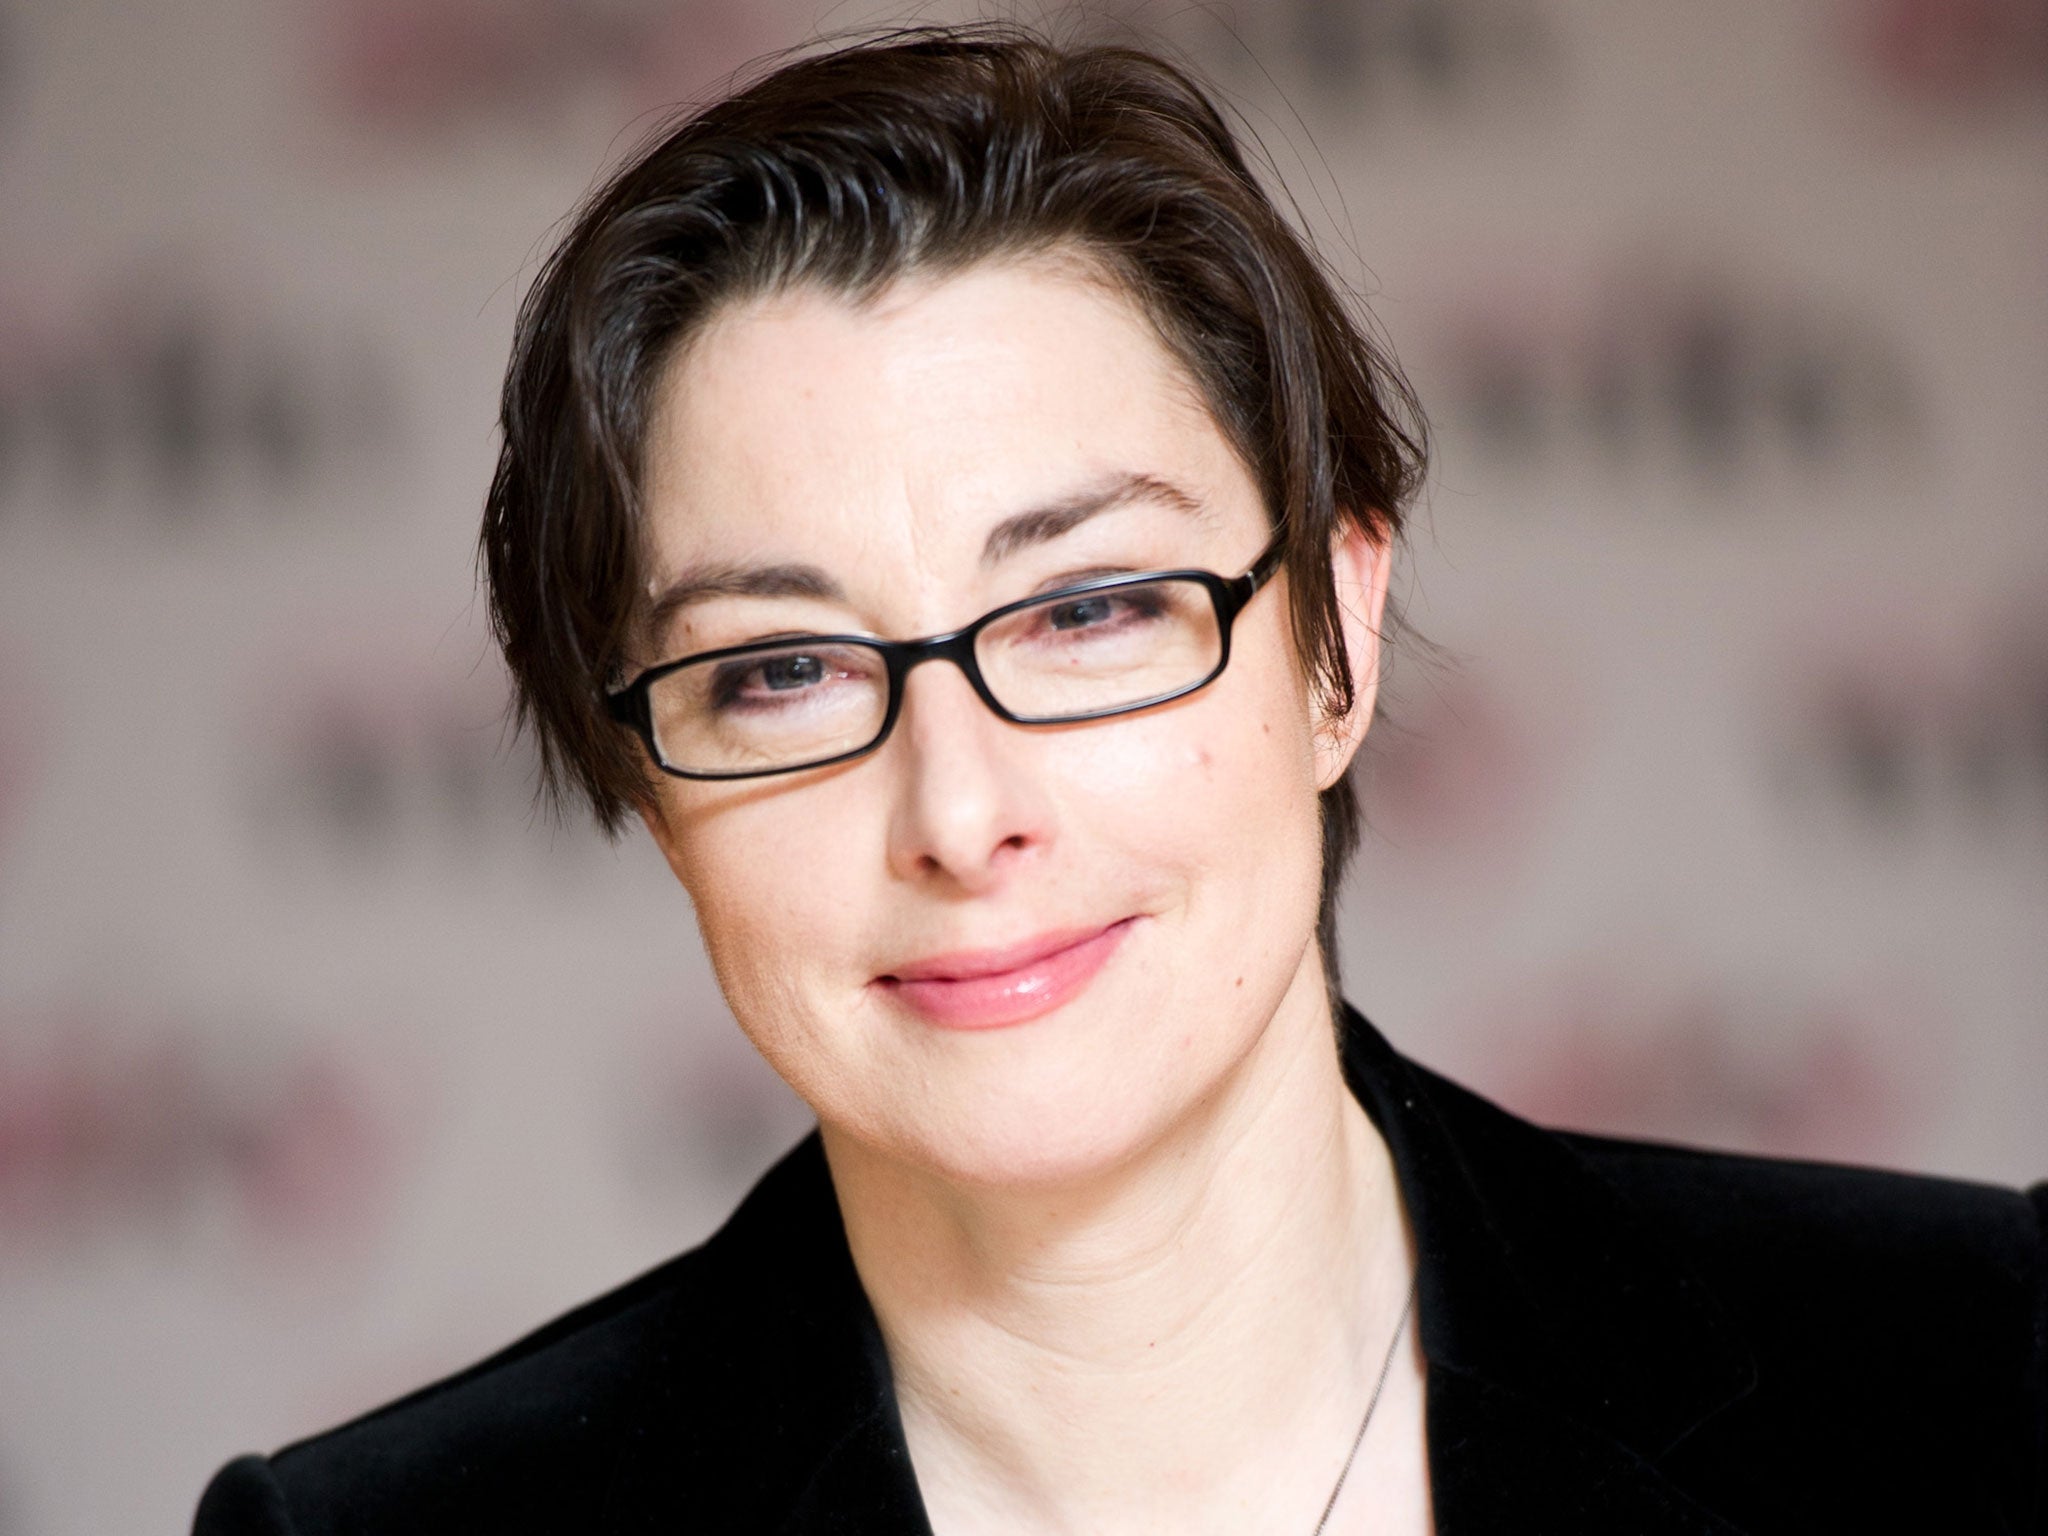 Sue Perkins has a growth on her pituitary gland